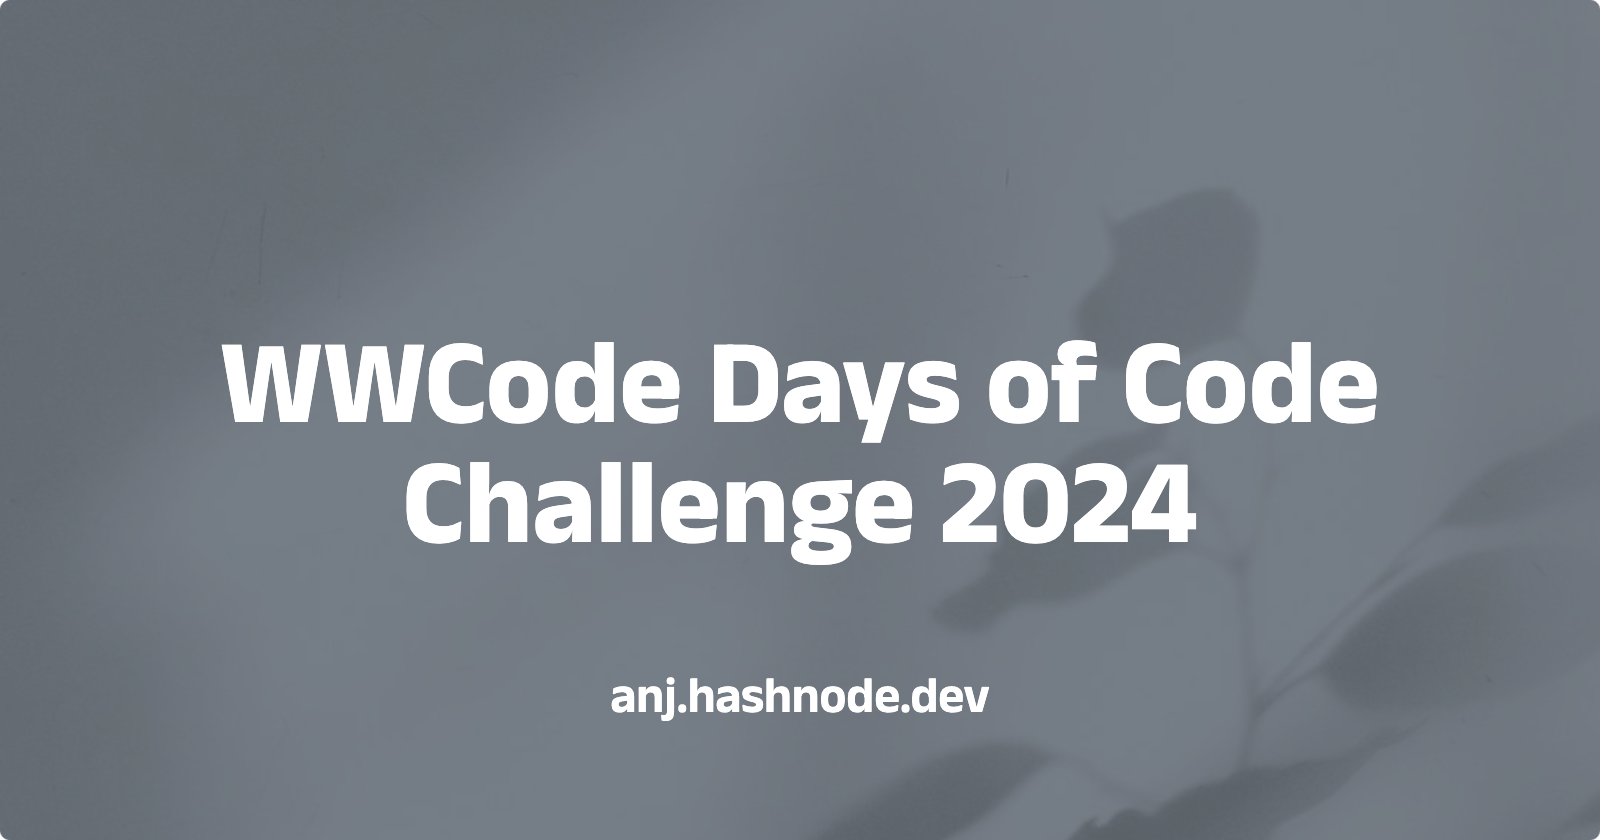 Coding Challenge #01: Create a program that swaps the values of two variables.